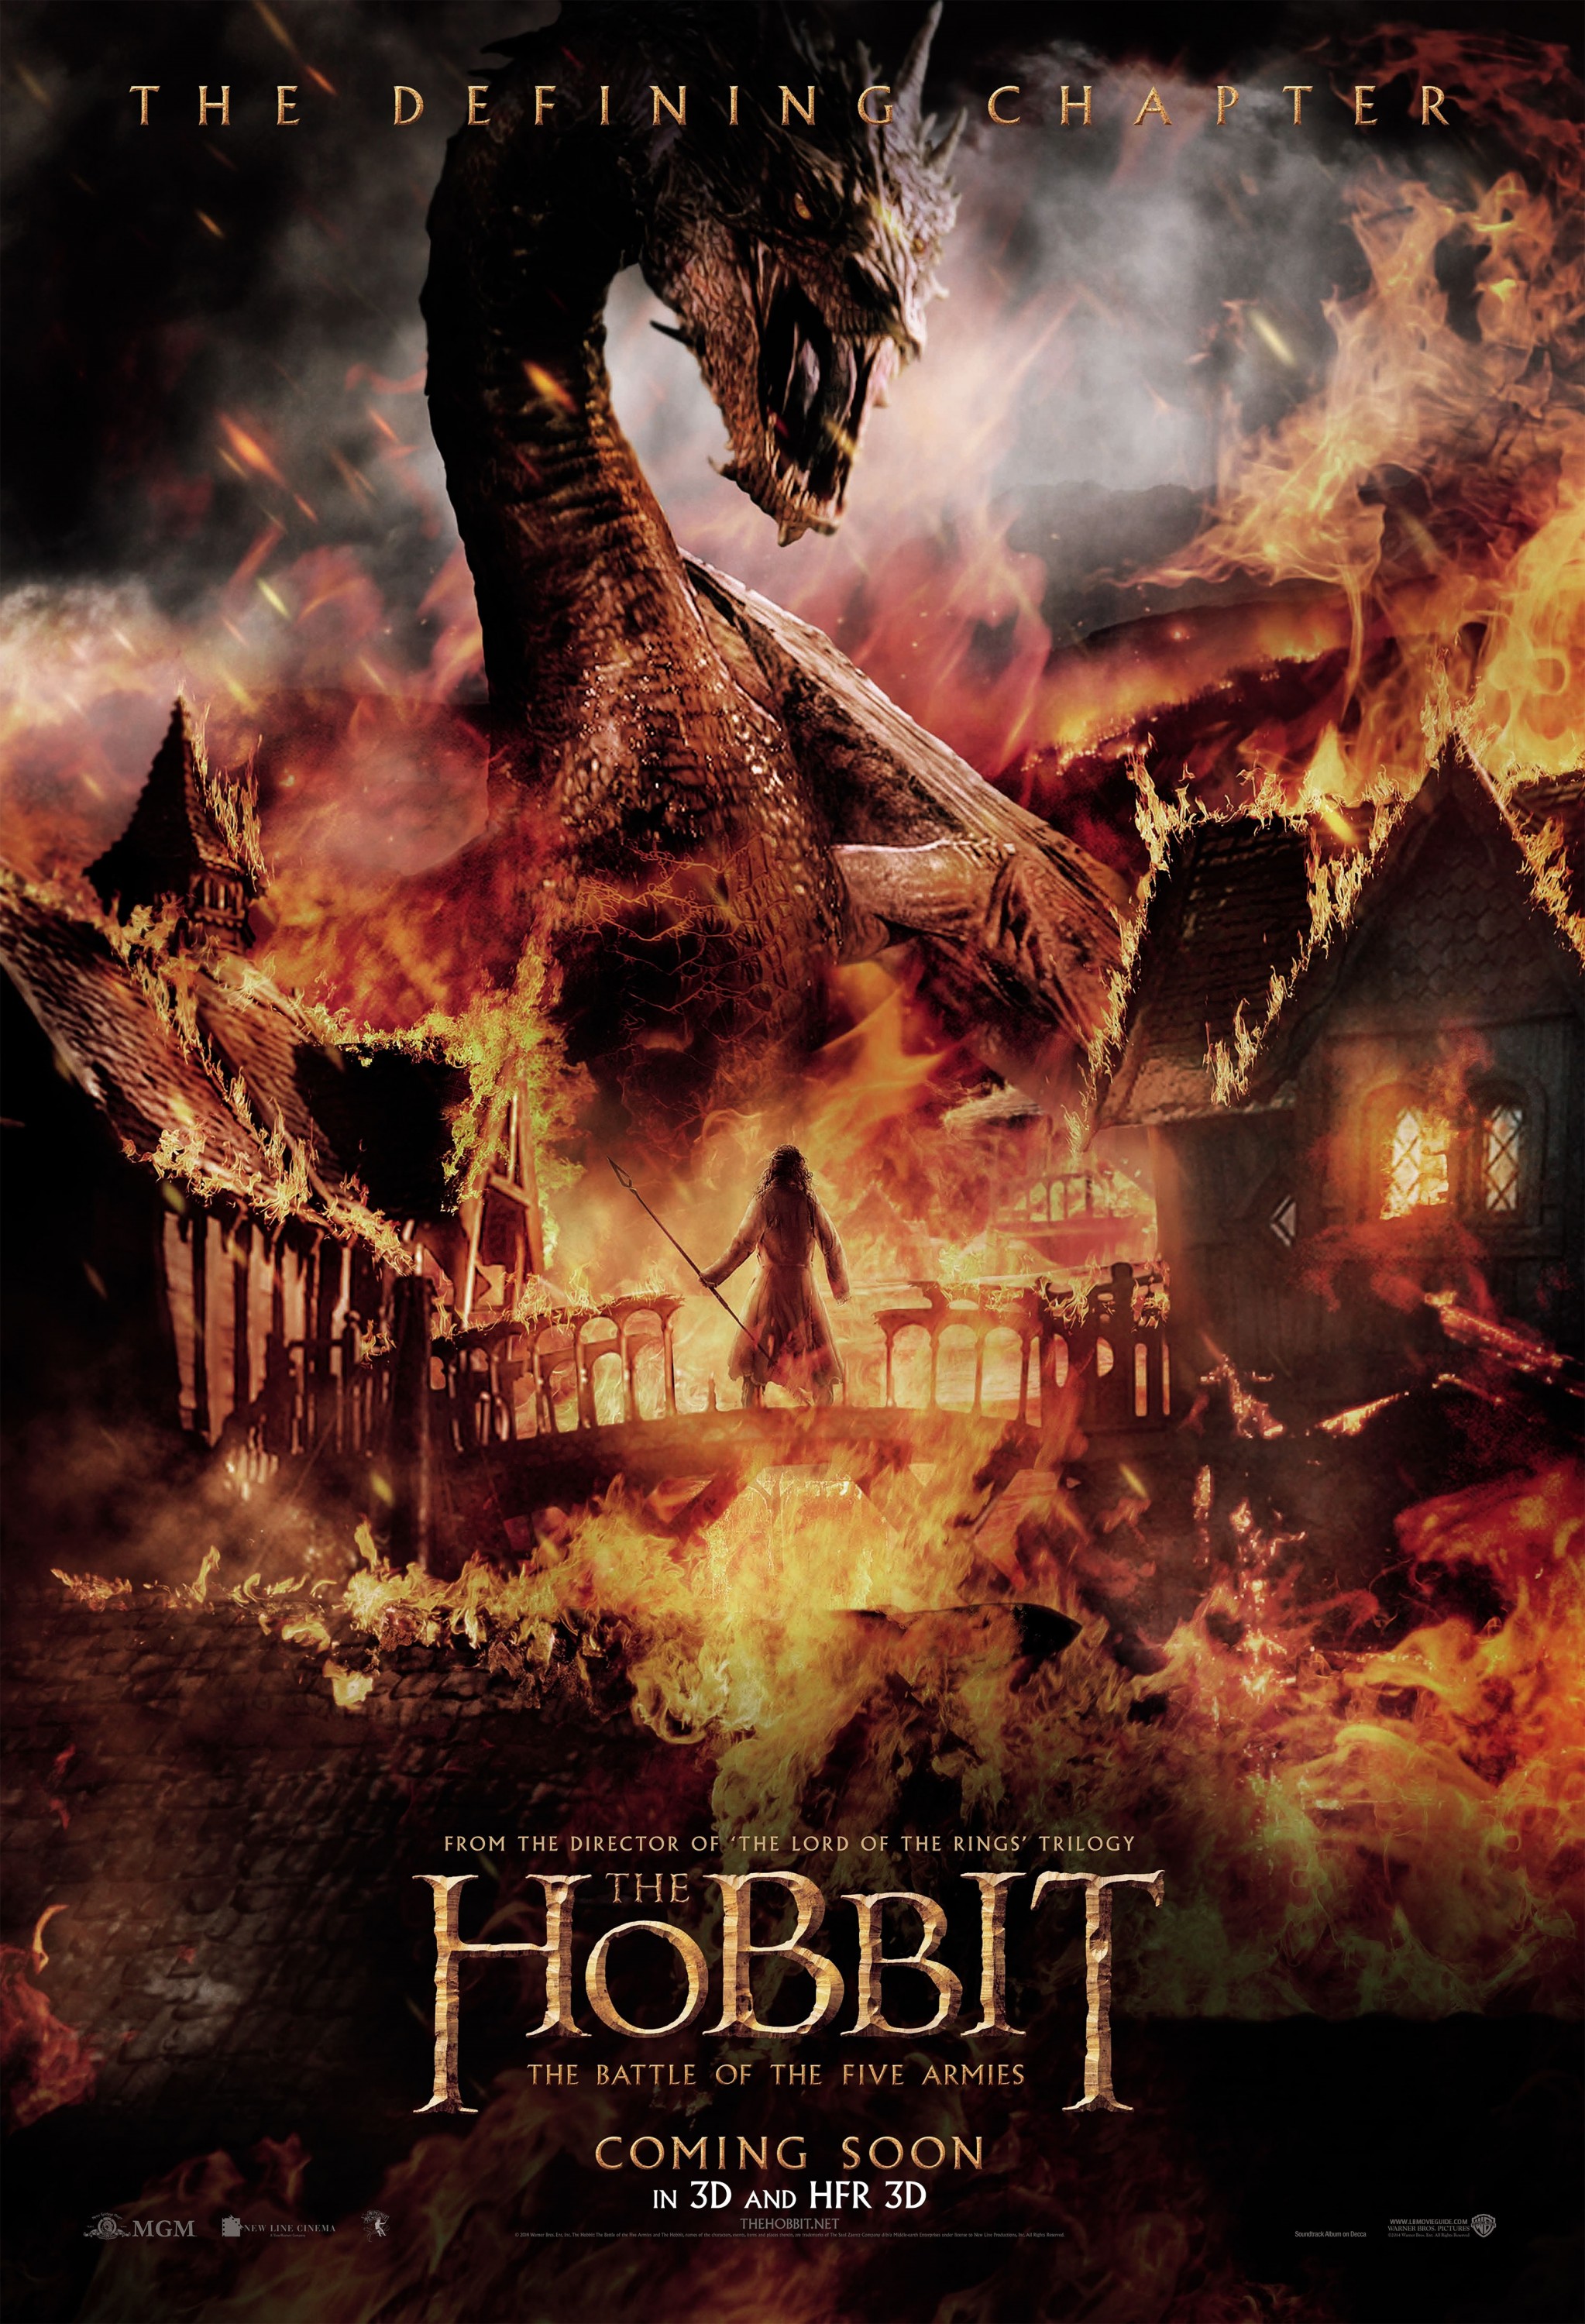 Mega Sized Movie Poster Image for The Hobbit: The Battle of the Five Armies (#26 of 28)